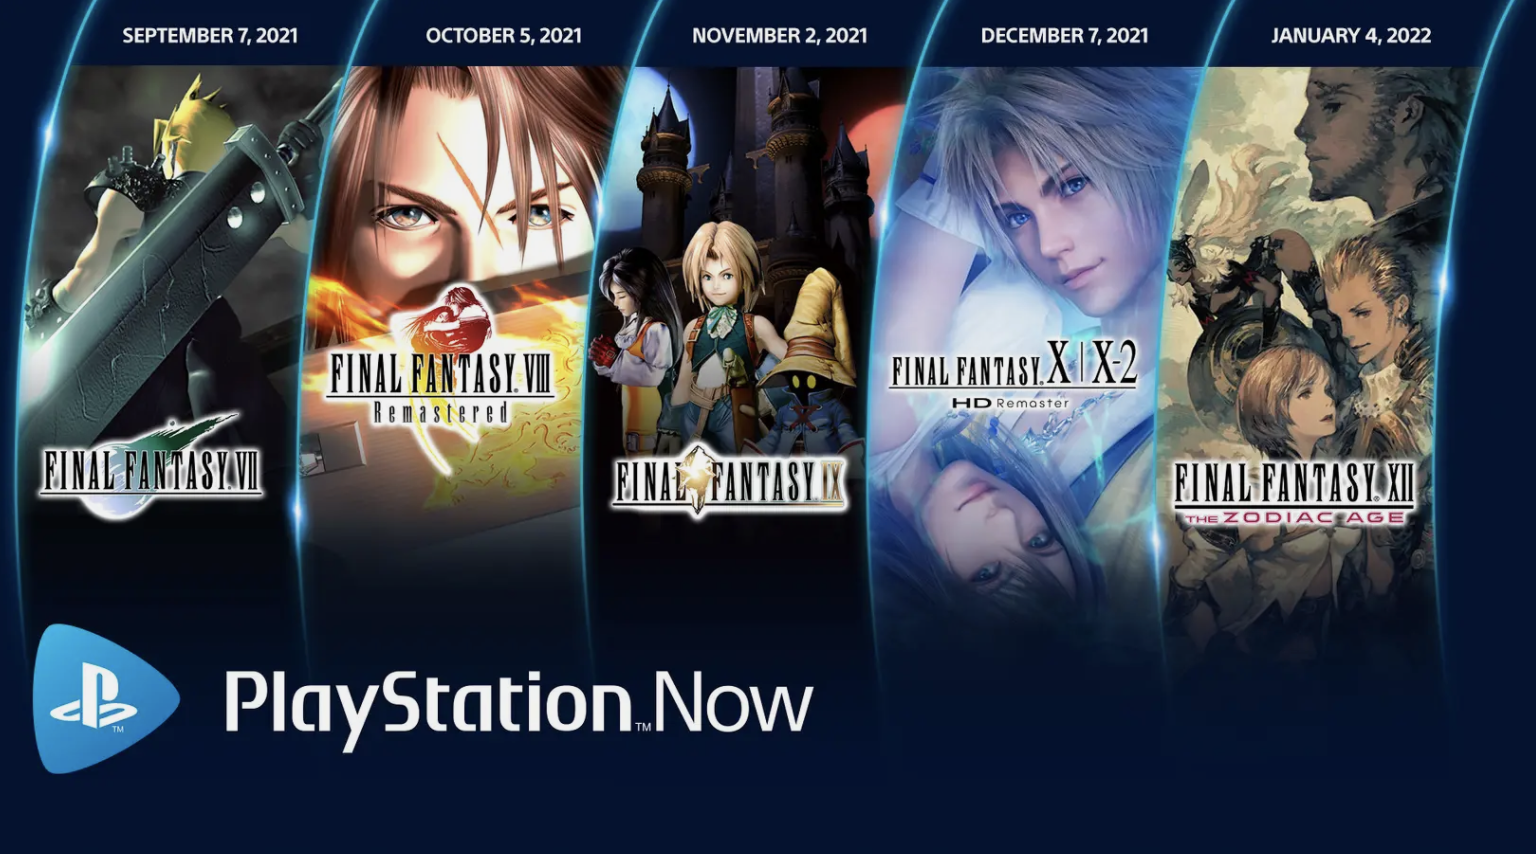 PlayStation Now Adding Five Final Fantasy Games Now Through January 2022 -  GameSpot